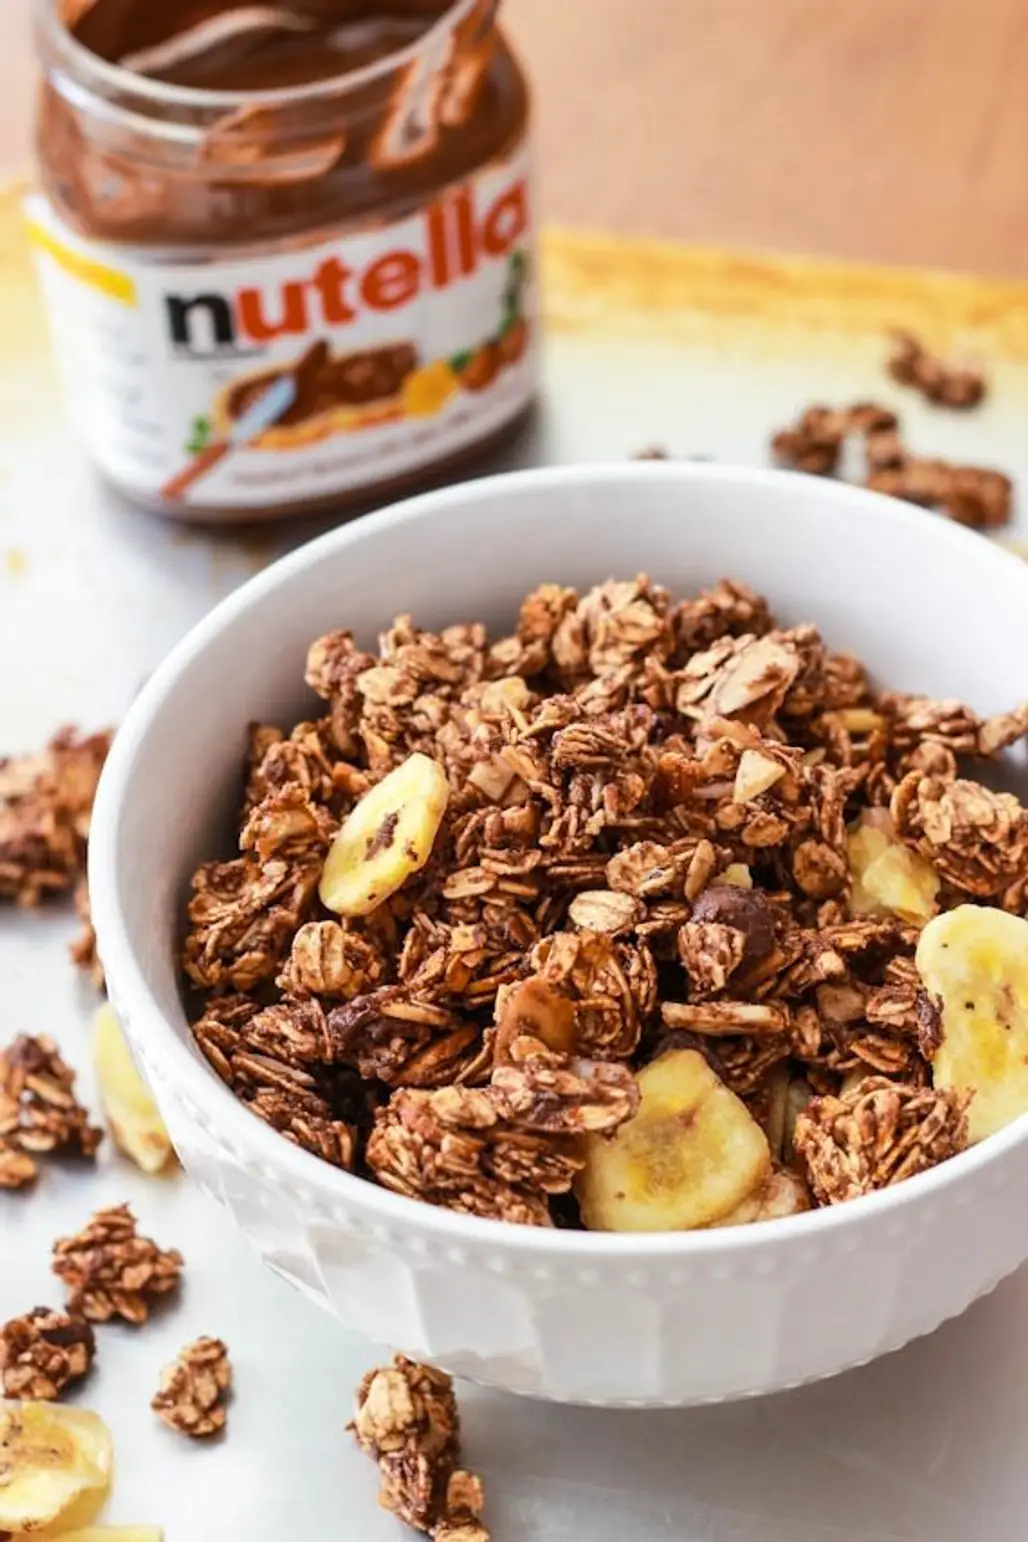 Nutella Oatmeal with Bananas